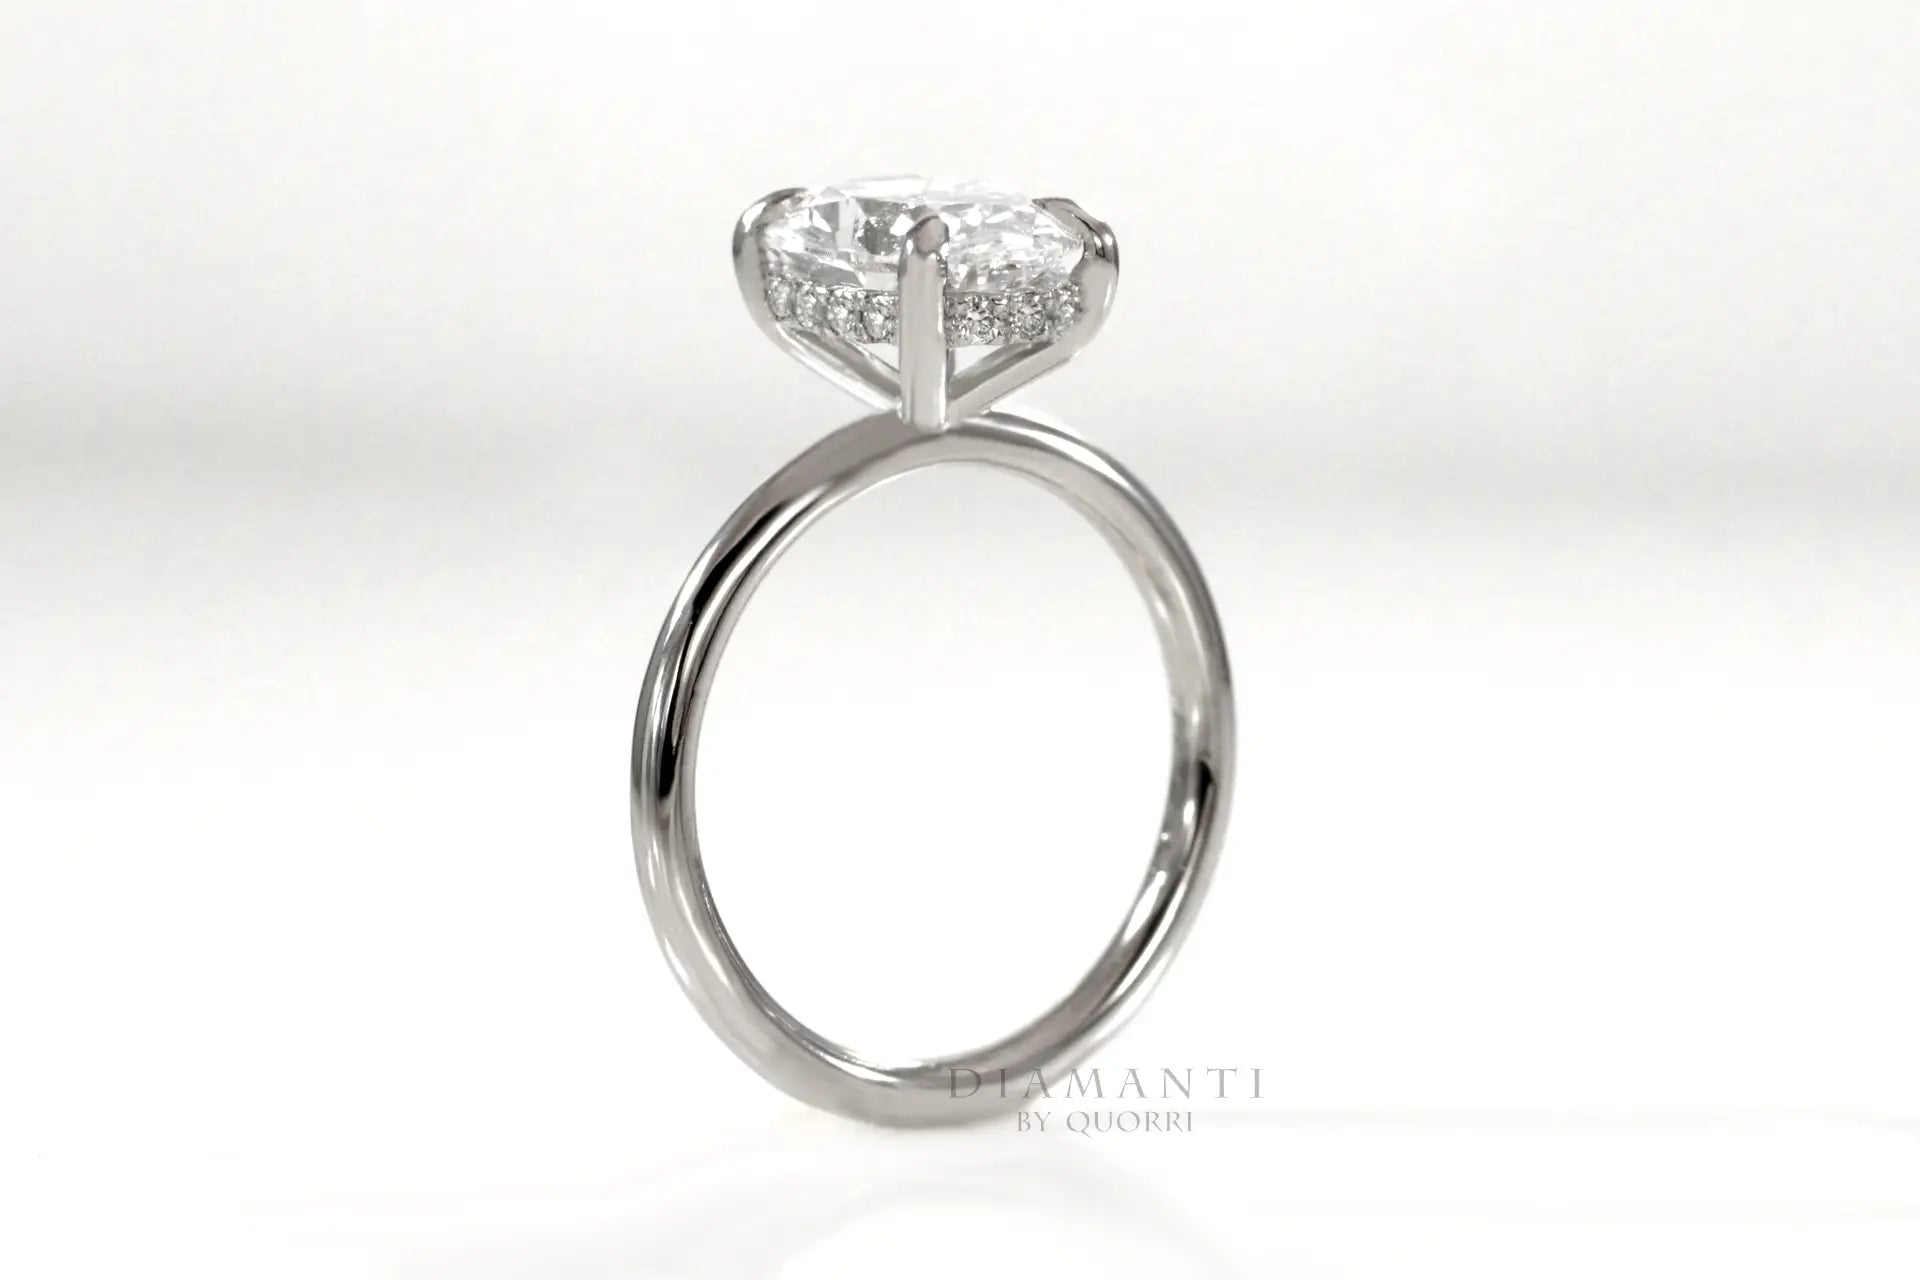 4 claw prong under-halo oval lab diamond engagement ring